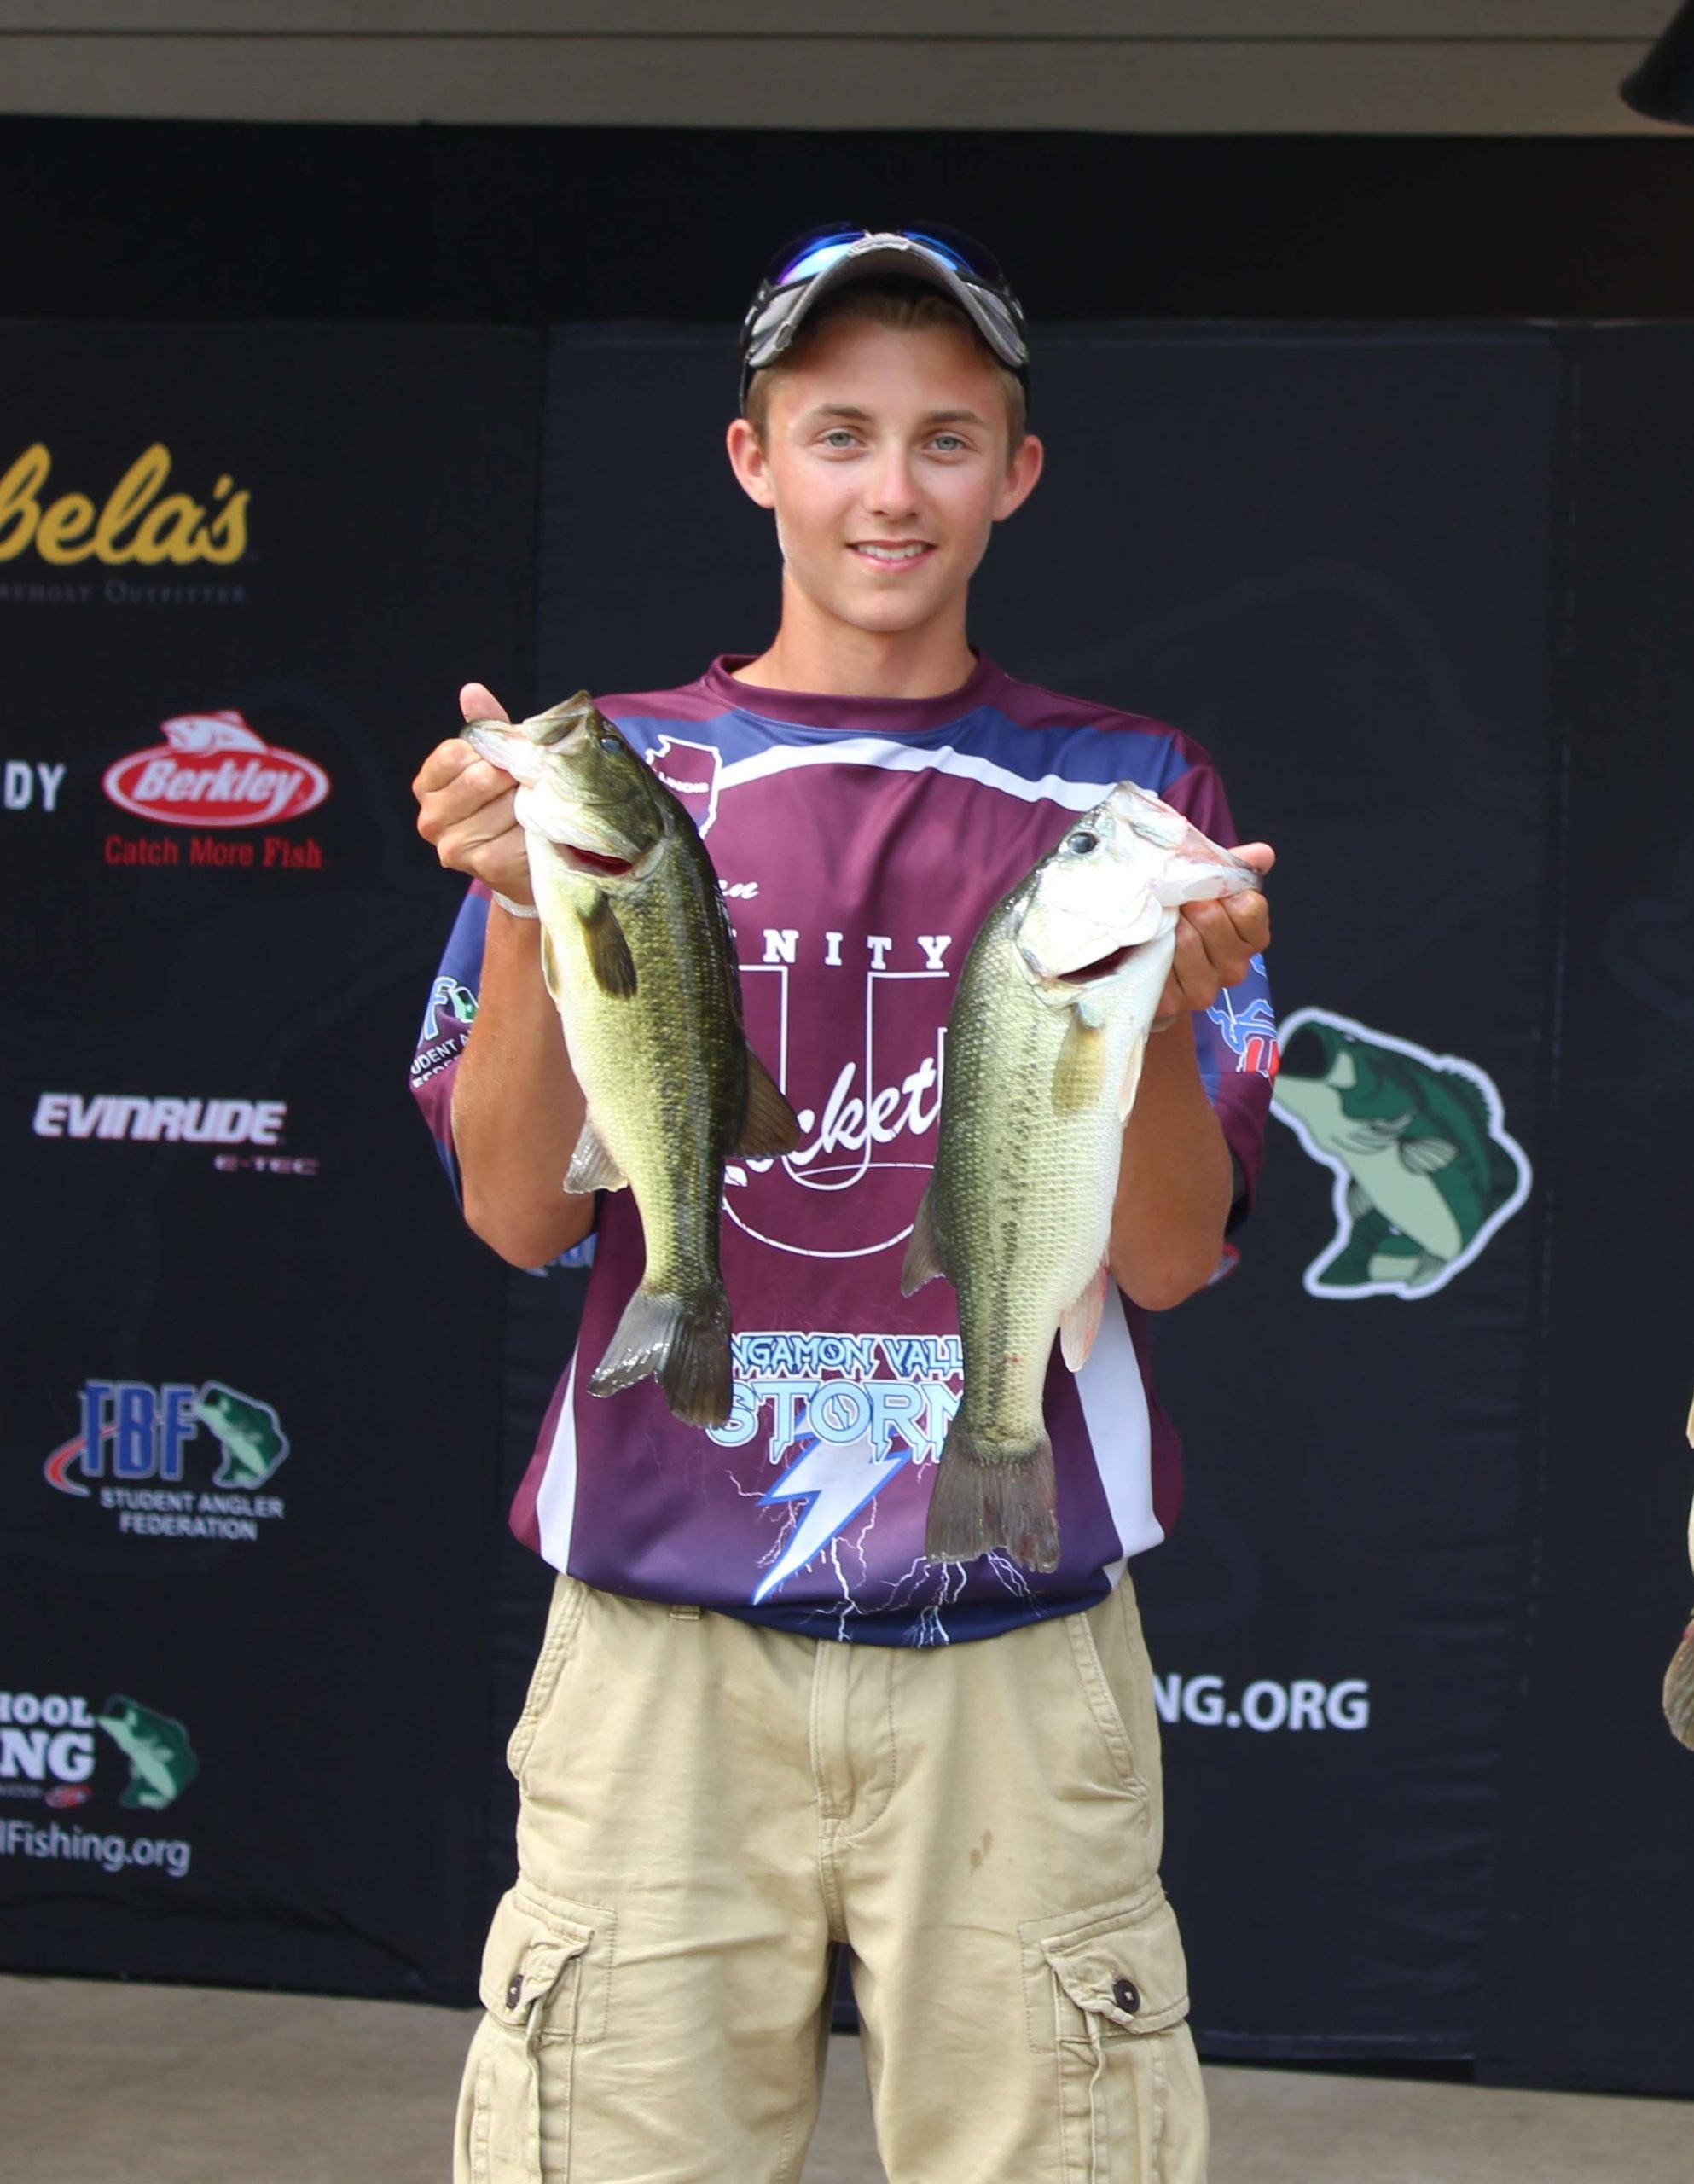 <p>Illinois: Nathan Doty</p>
<p>
Doty is a 10th-grade student at Sangamon Valley High School. He won the high school invitational on Clinton Lake in spring 2014, and he competes on the adult side in Fishers of Men Lagacy tournaments and in Thursday night local events. Doty teaches elementary school students about casting, tying knots and the catch-and-release ethic.